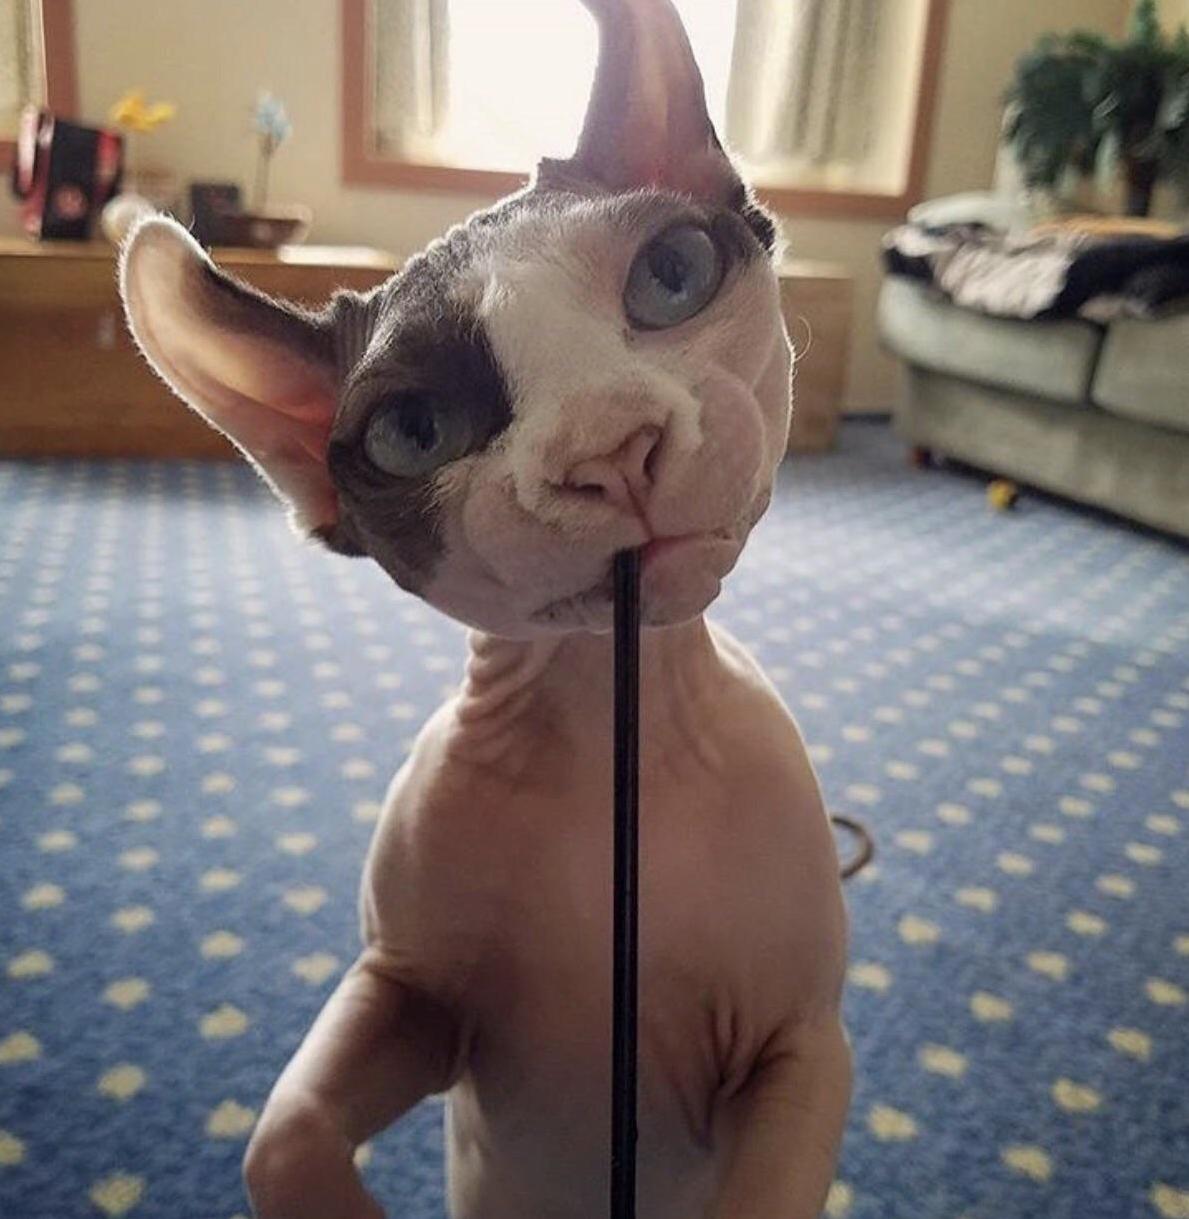 Where can i find sphinx kittens in ct